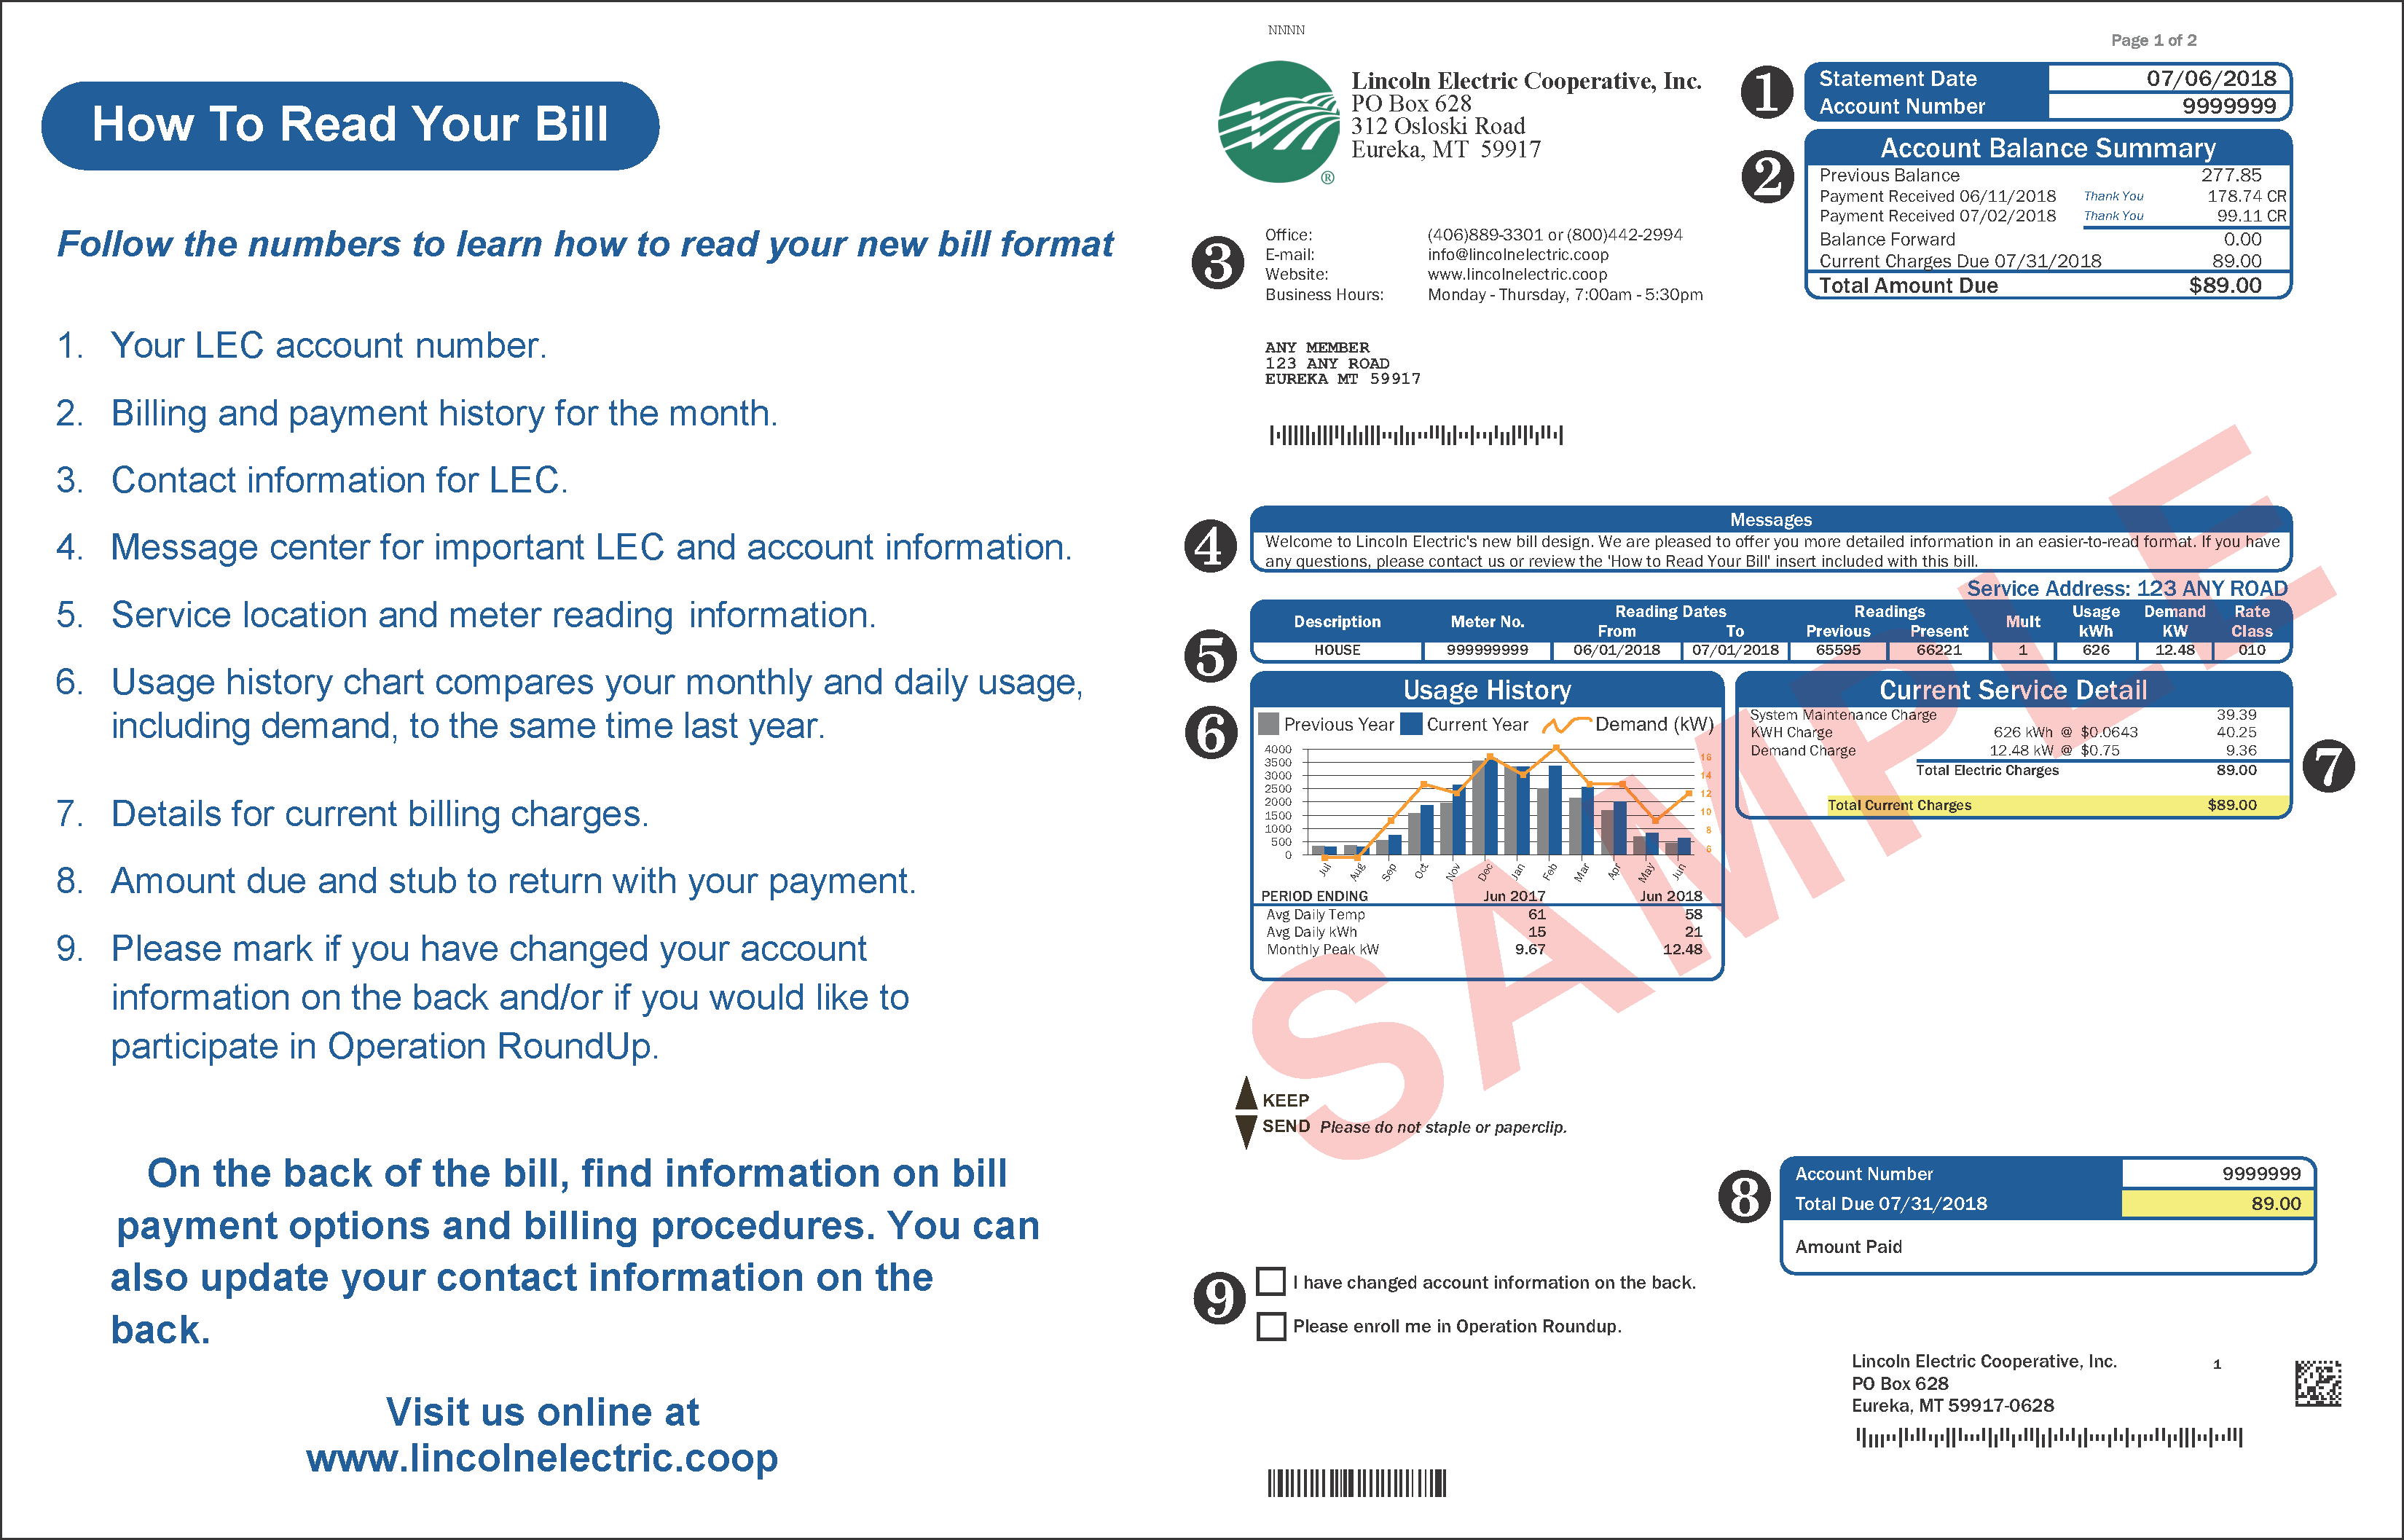 How to read your bill image